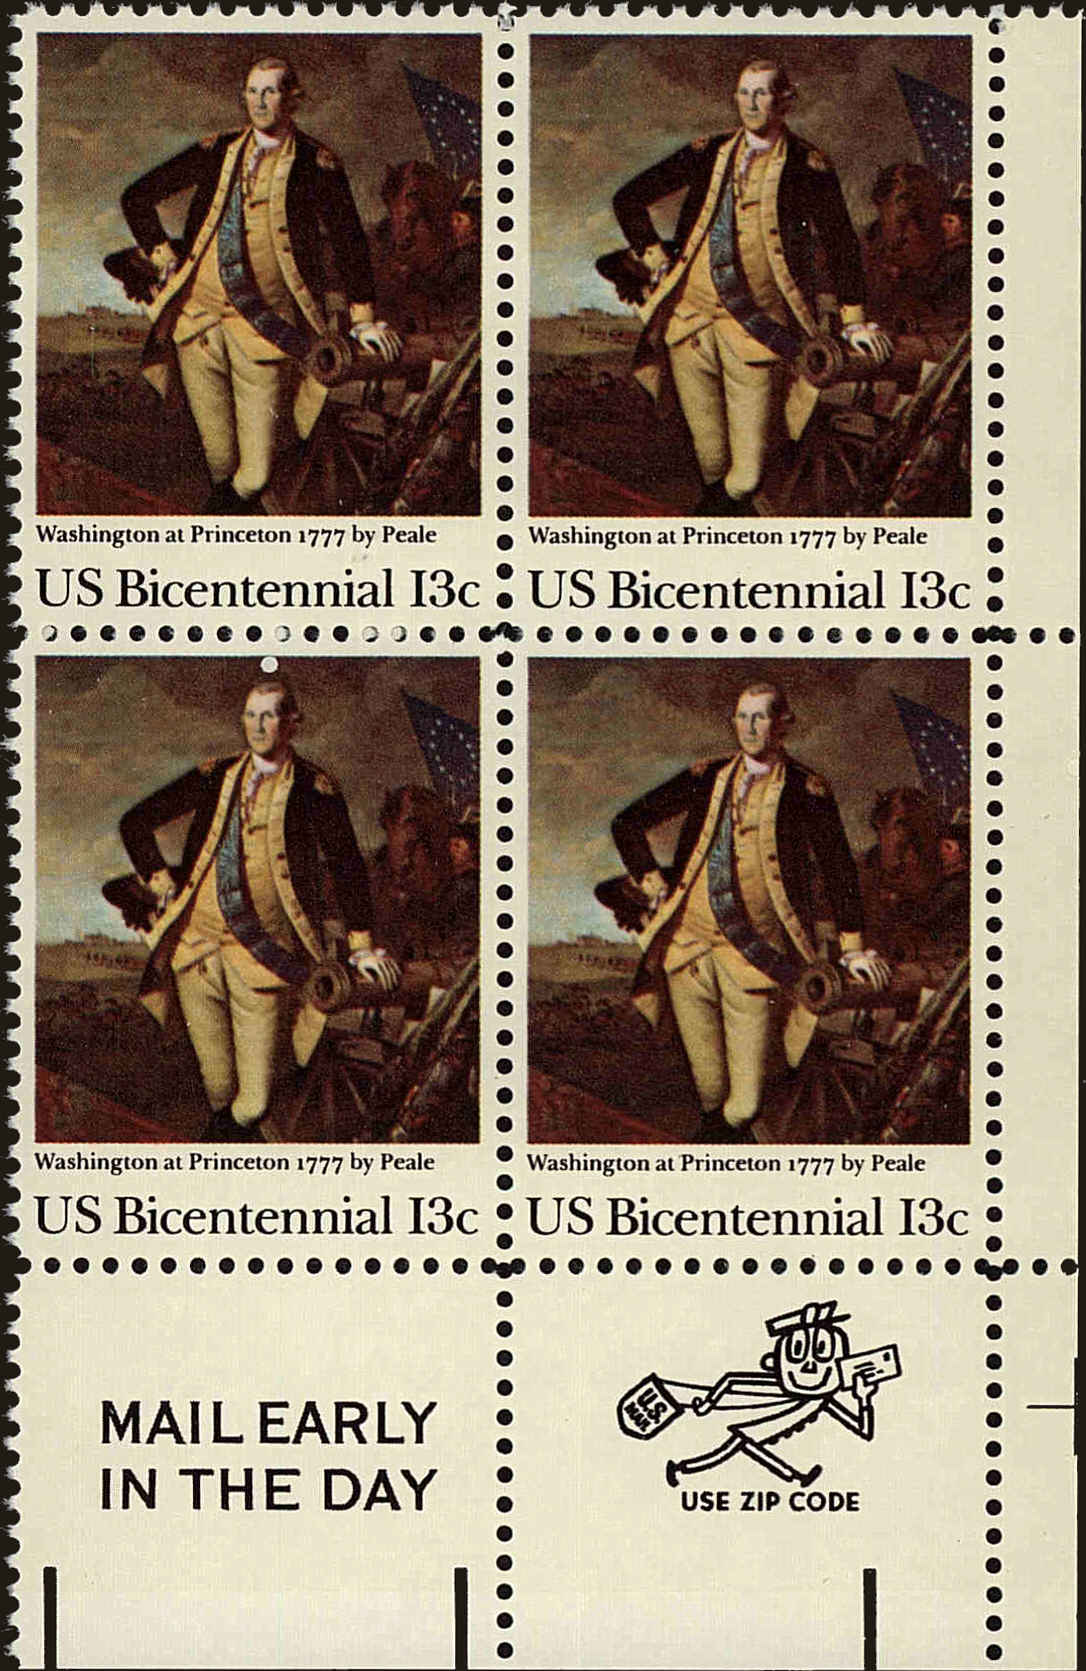 Front view of United States 1704 collectors stamp